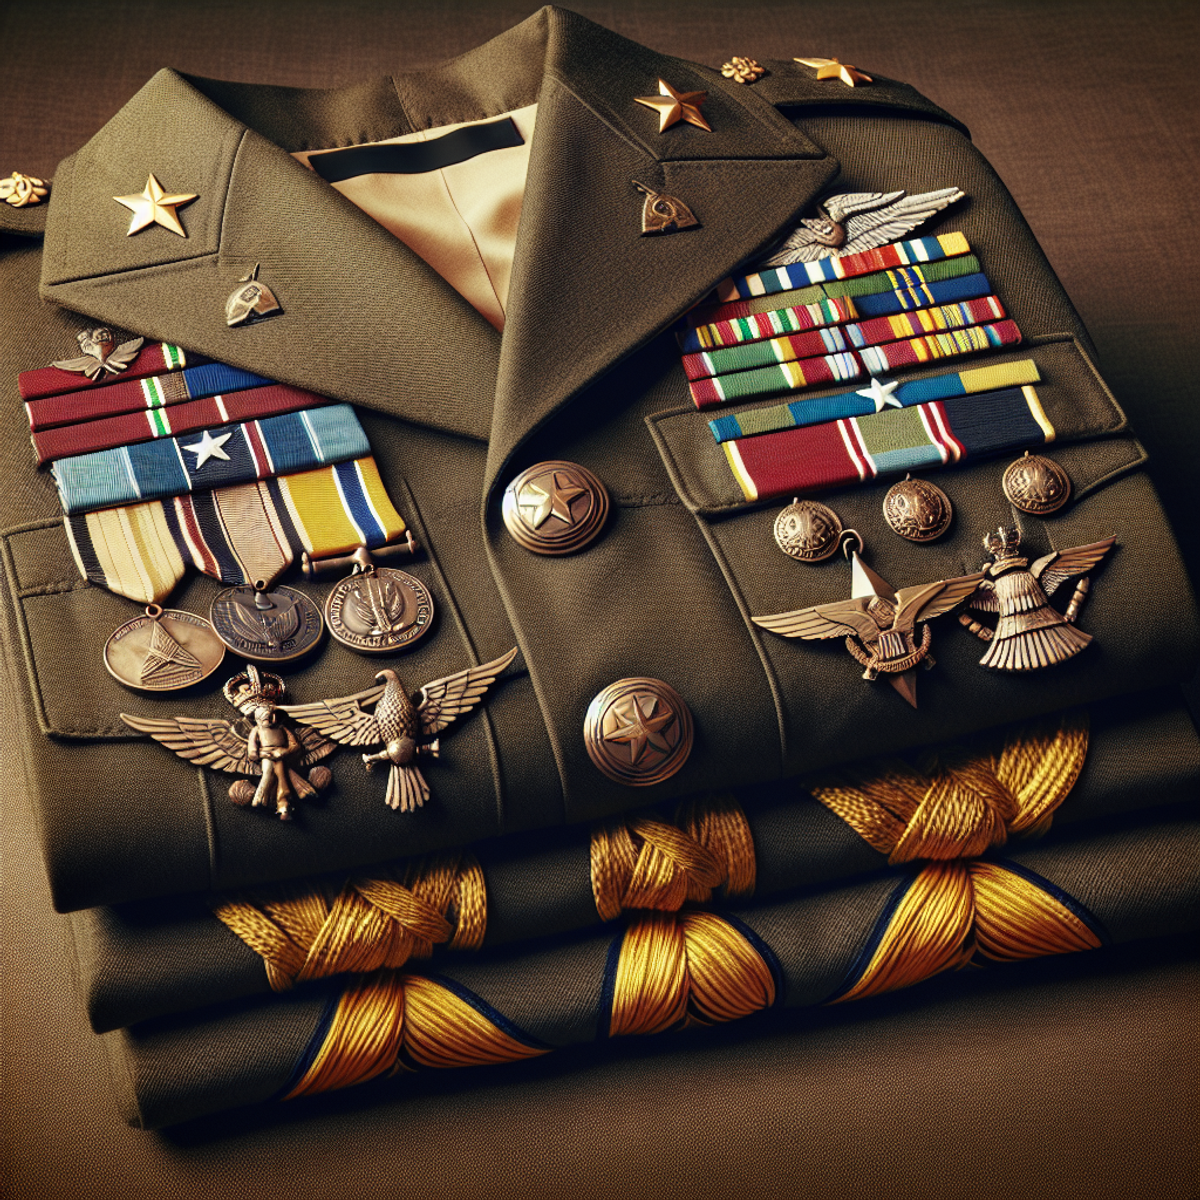 Military Collectibles and Memorabilia Appraisers